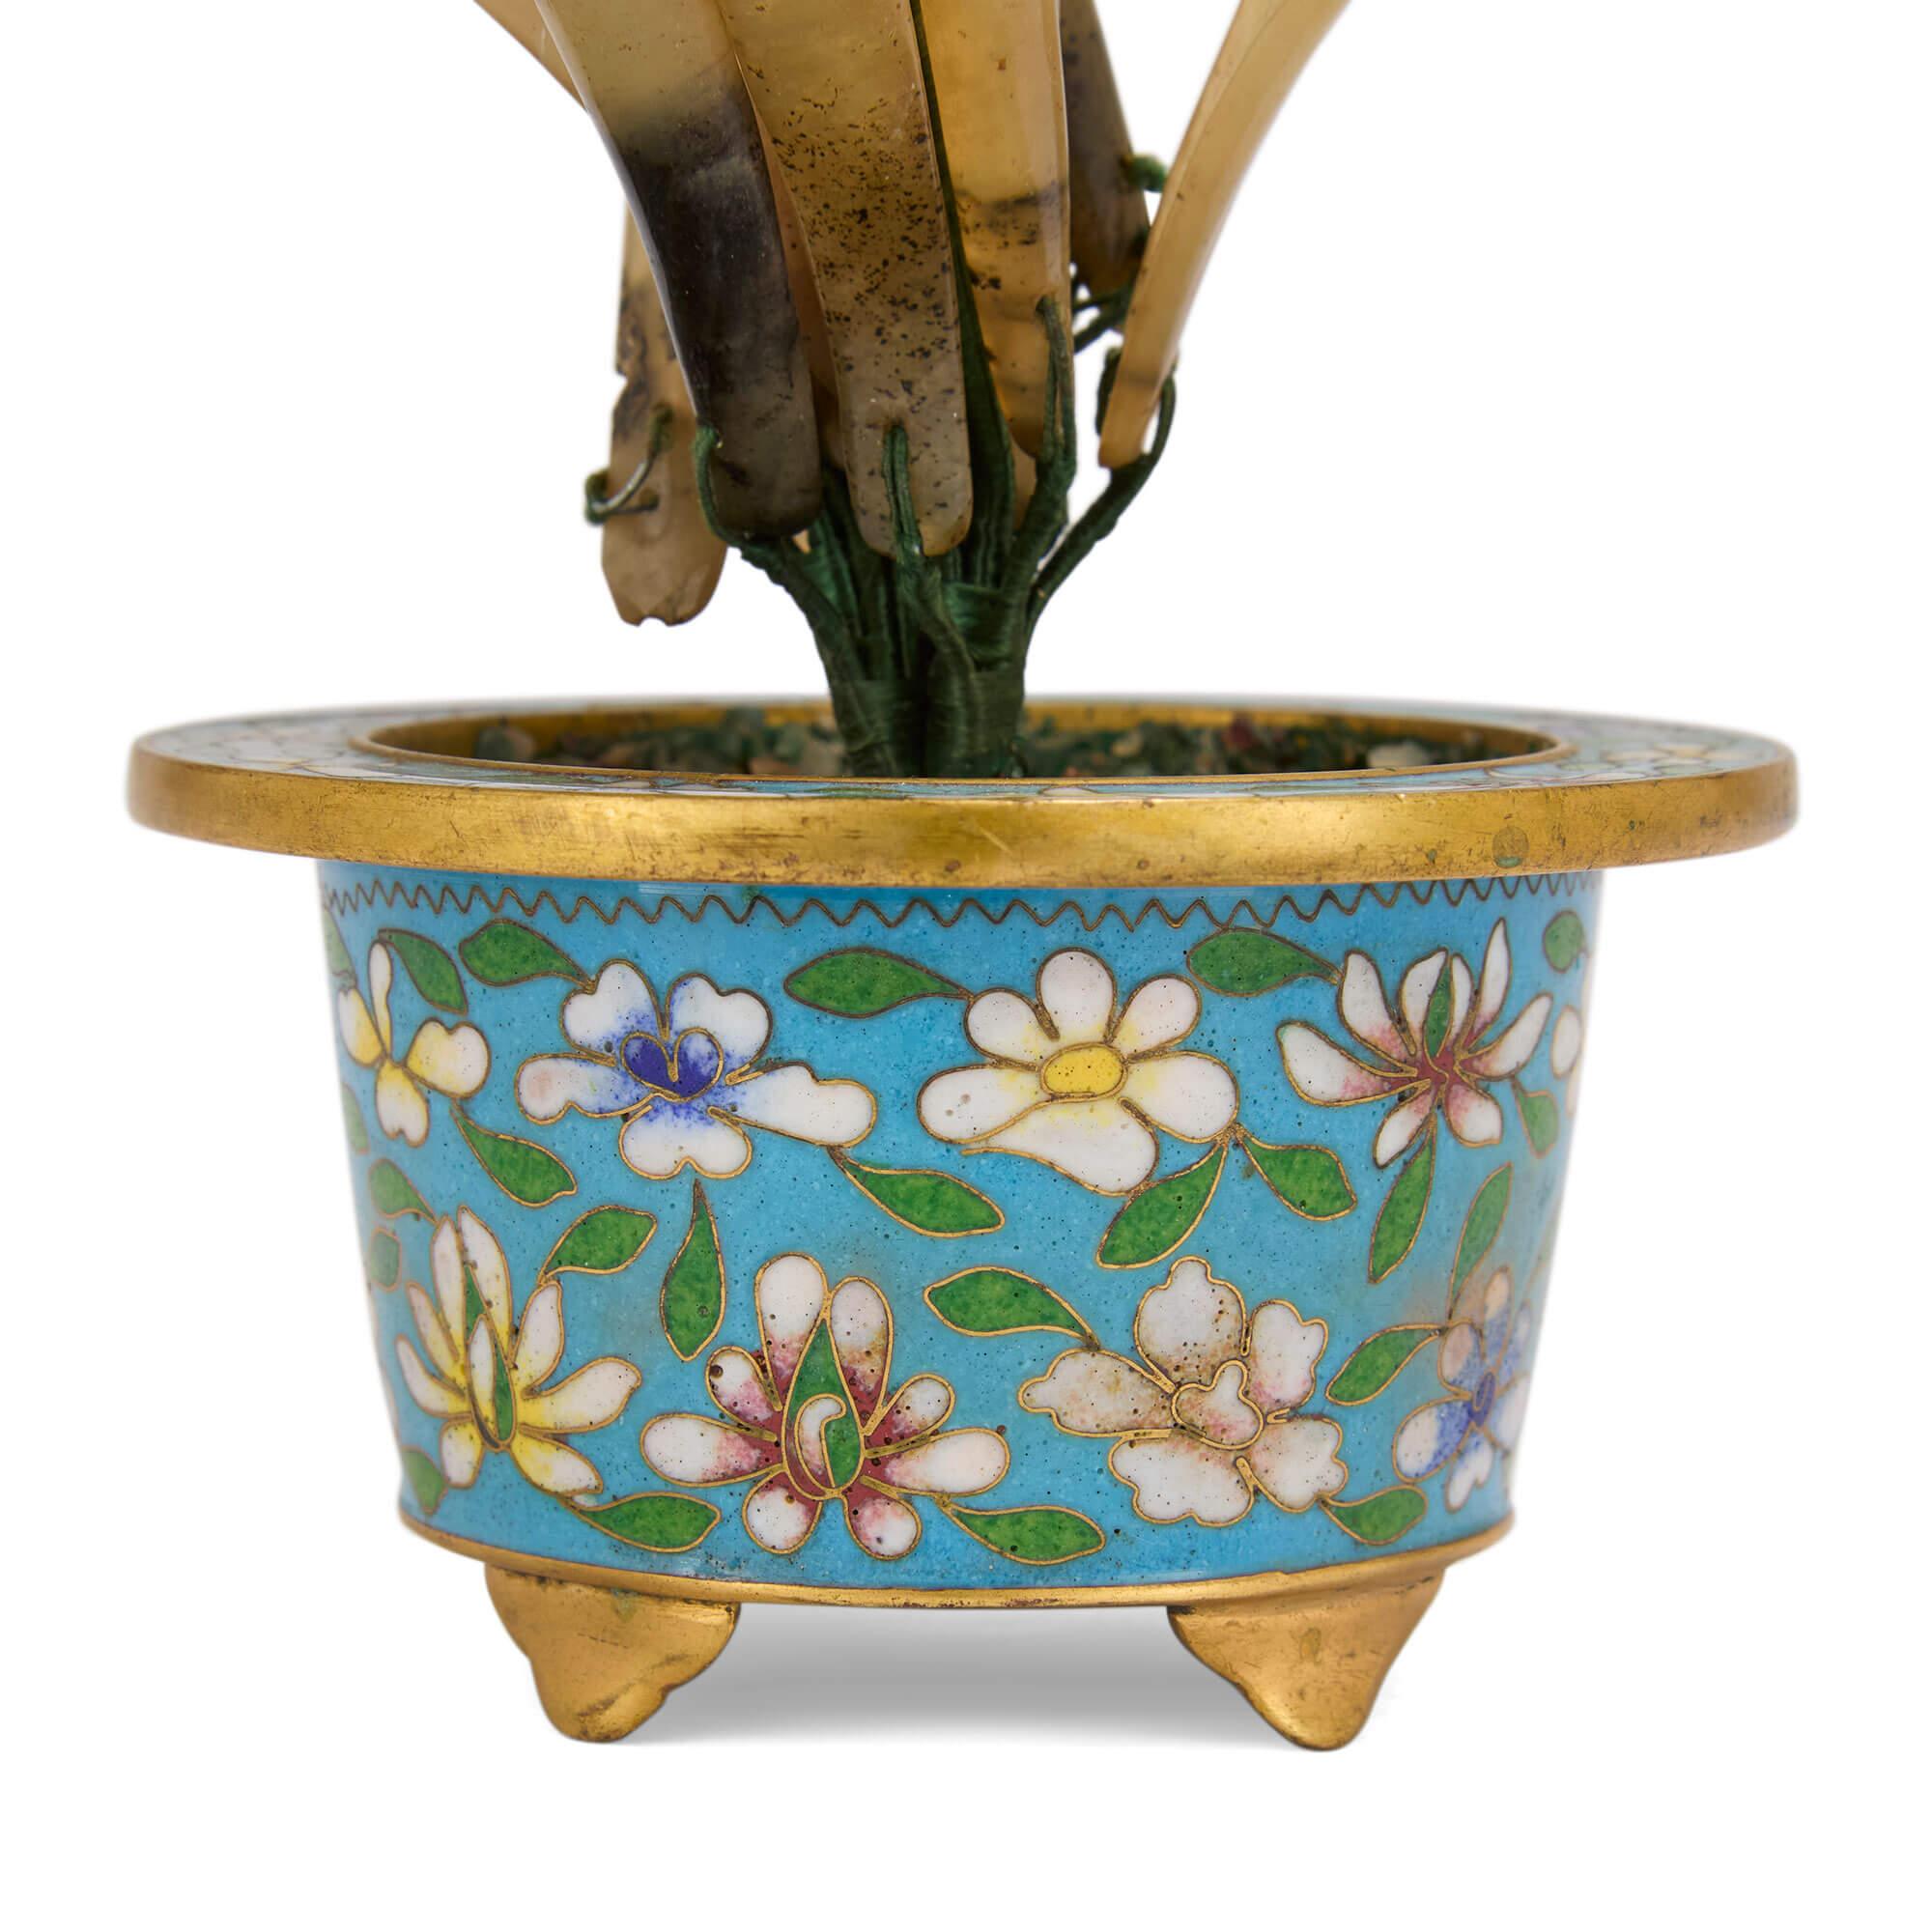 Chinese hardstone flower model in a cloisonné enamel planter
Chinese, 20th Century
Height 20cm, width 12cm, depth 9cm

This superb flower model brings together a host of precious stones, placed inside a cloisonné enamel planter decorated with floral